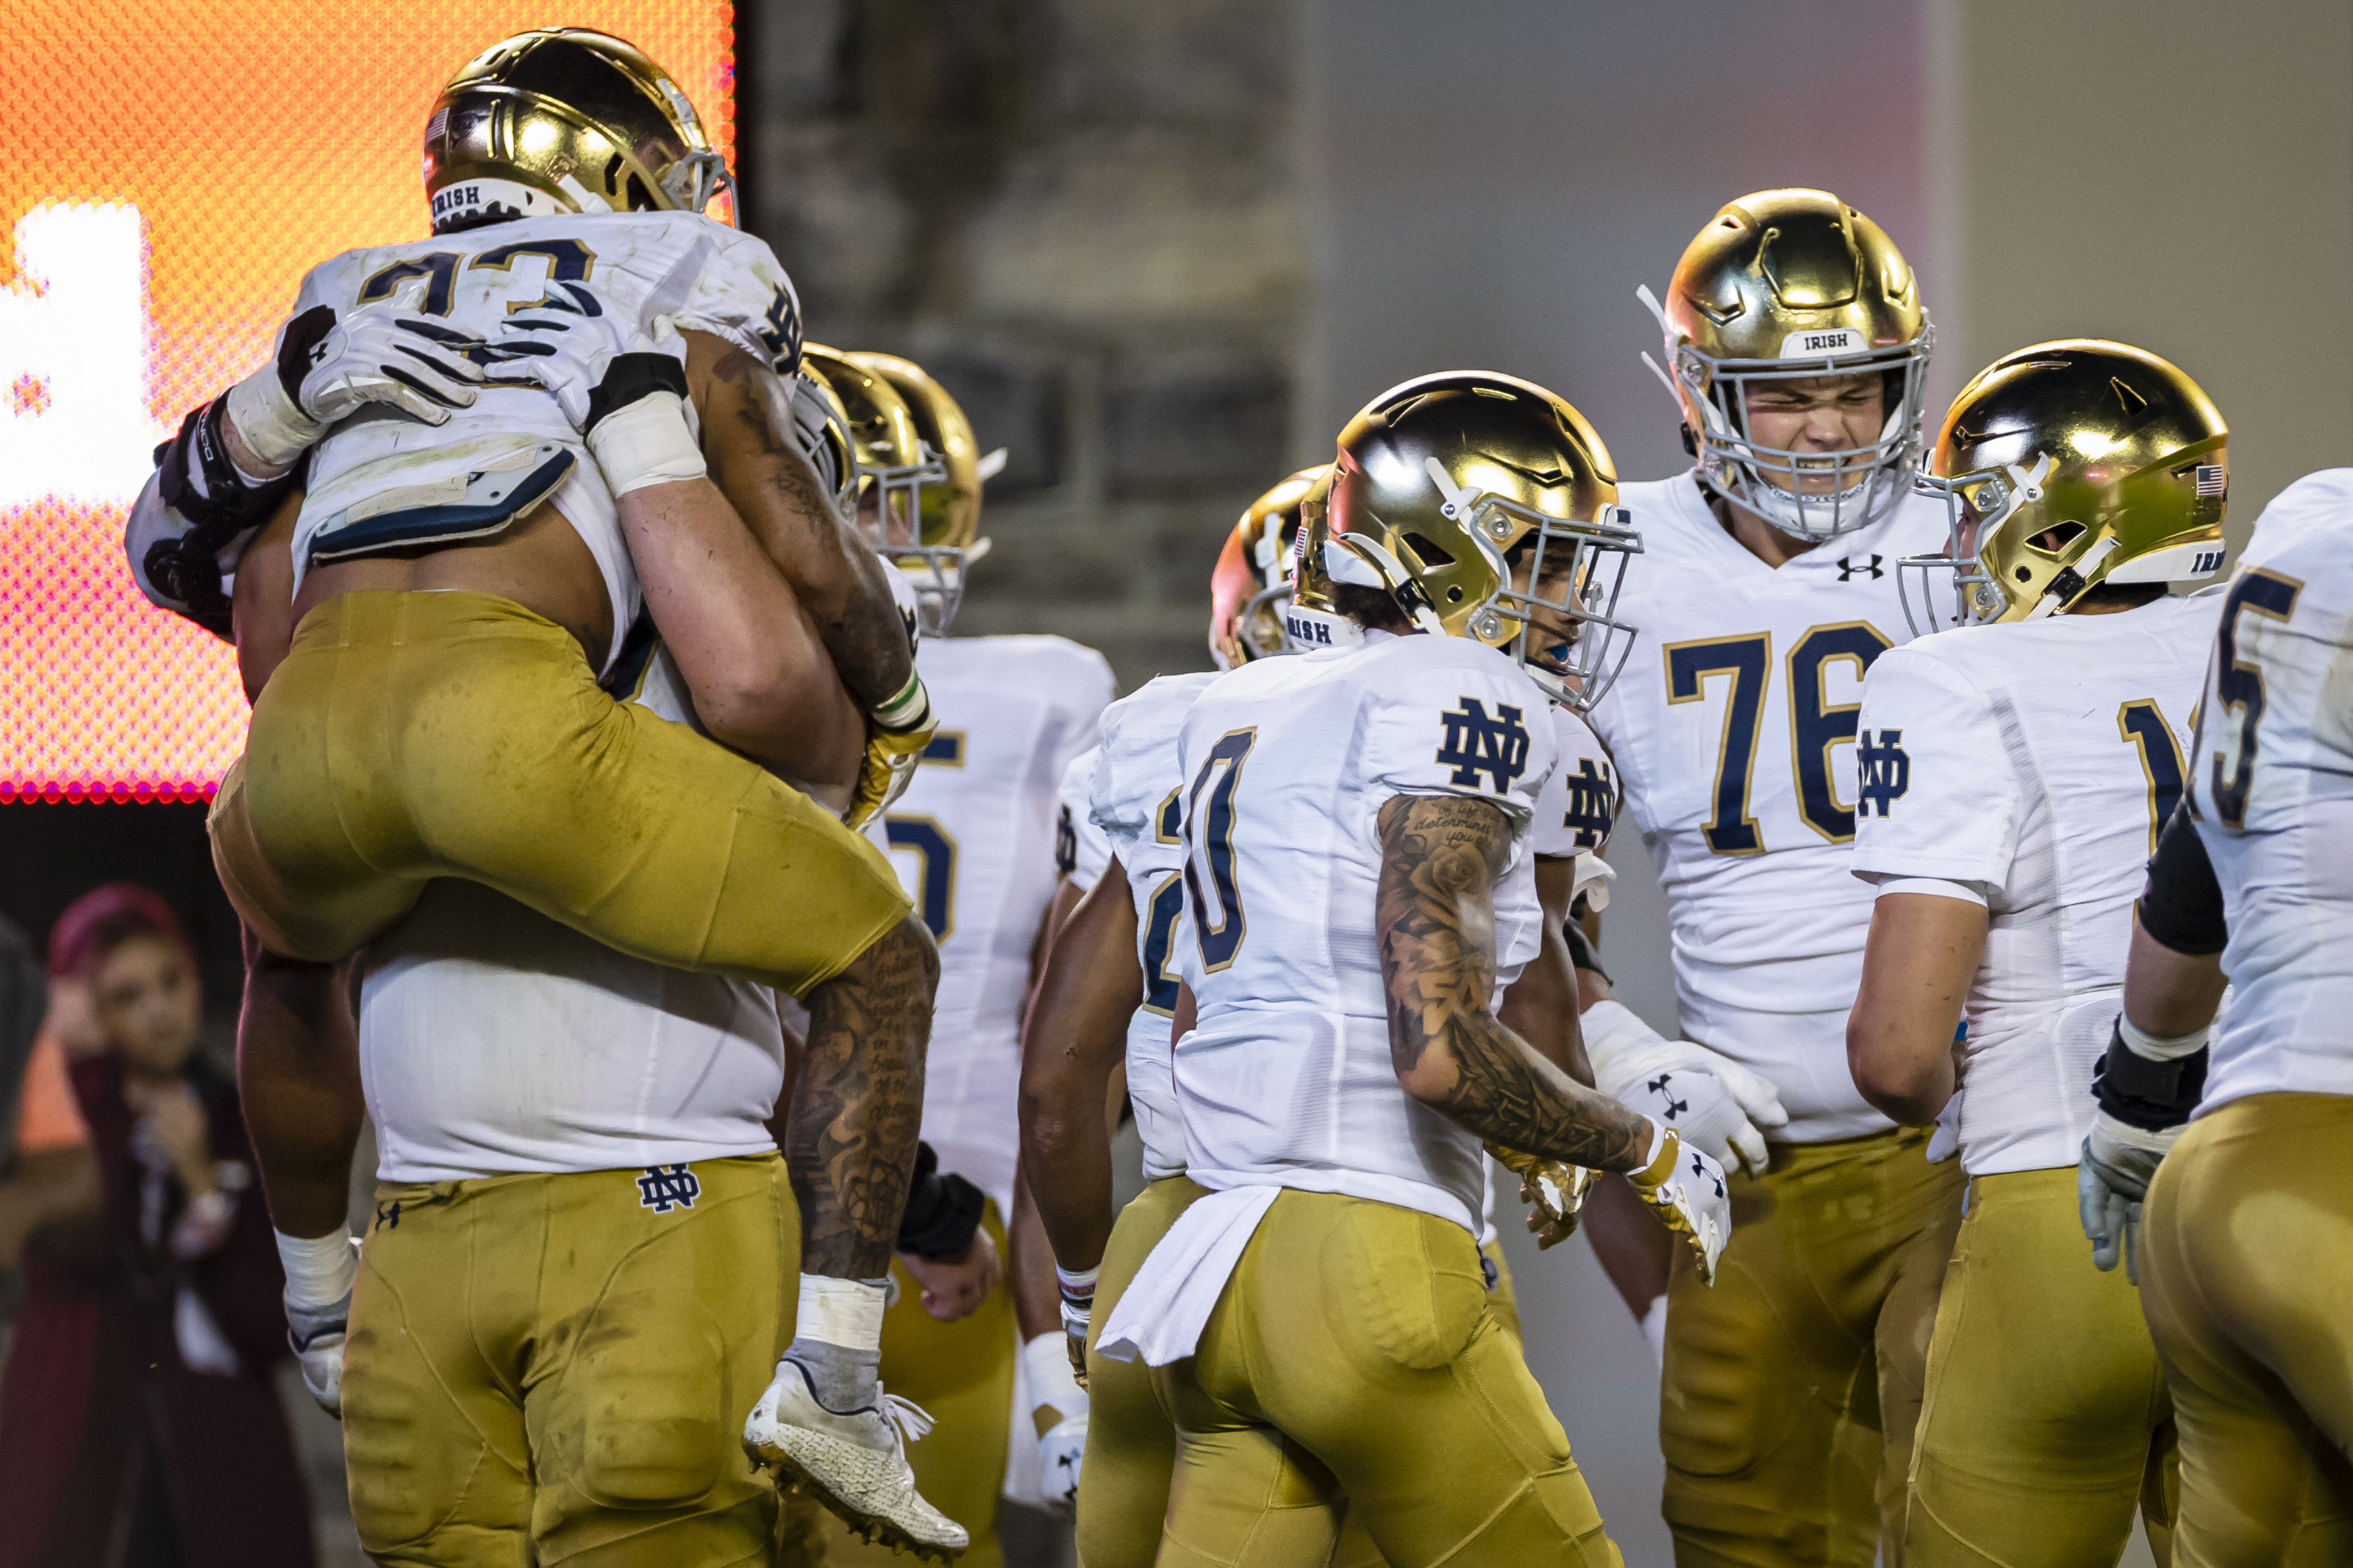 Notre Dame Football will start 2020 ranked #10 in AP Poll - One